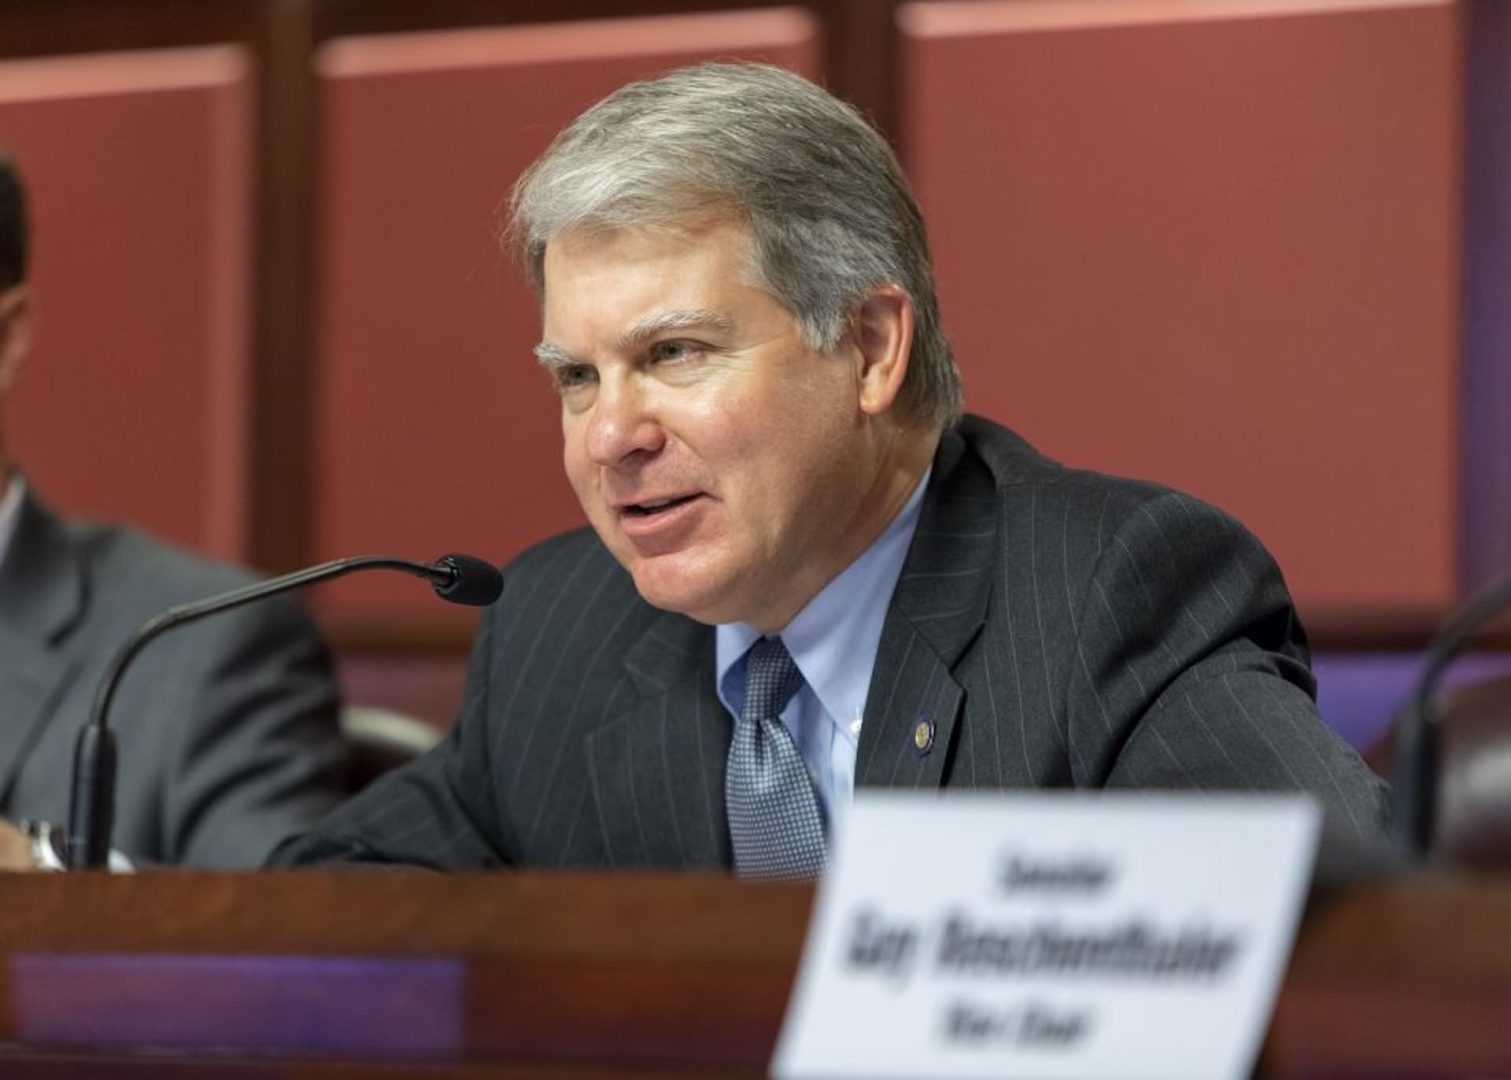 Despite two audits and assurances from every level of government that the election was free of widespread fraud, Sen. David Argall (R., Schuylkill) told Spotlight PA he does not see the “damage in doing it one more time to try to answer the concerns that people have.”